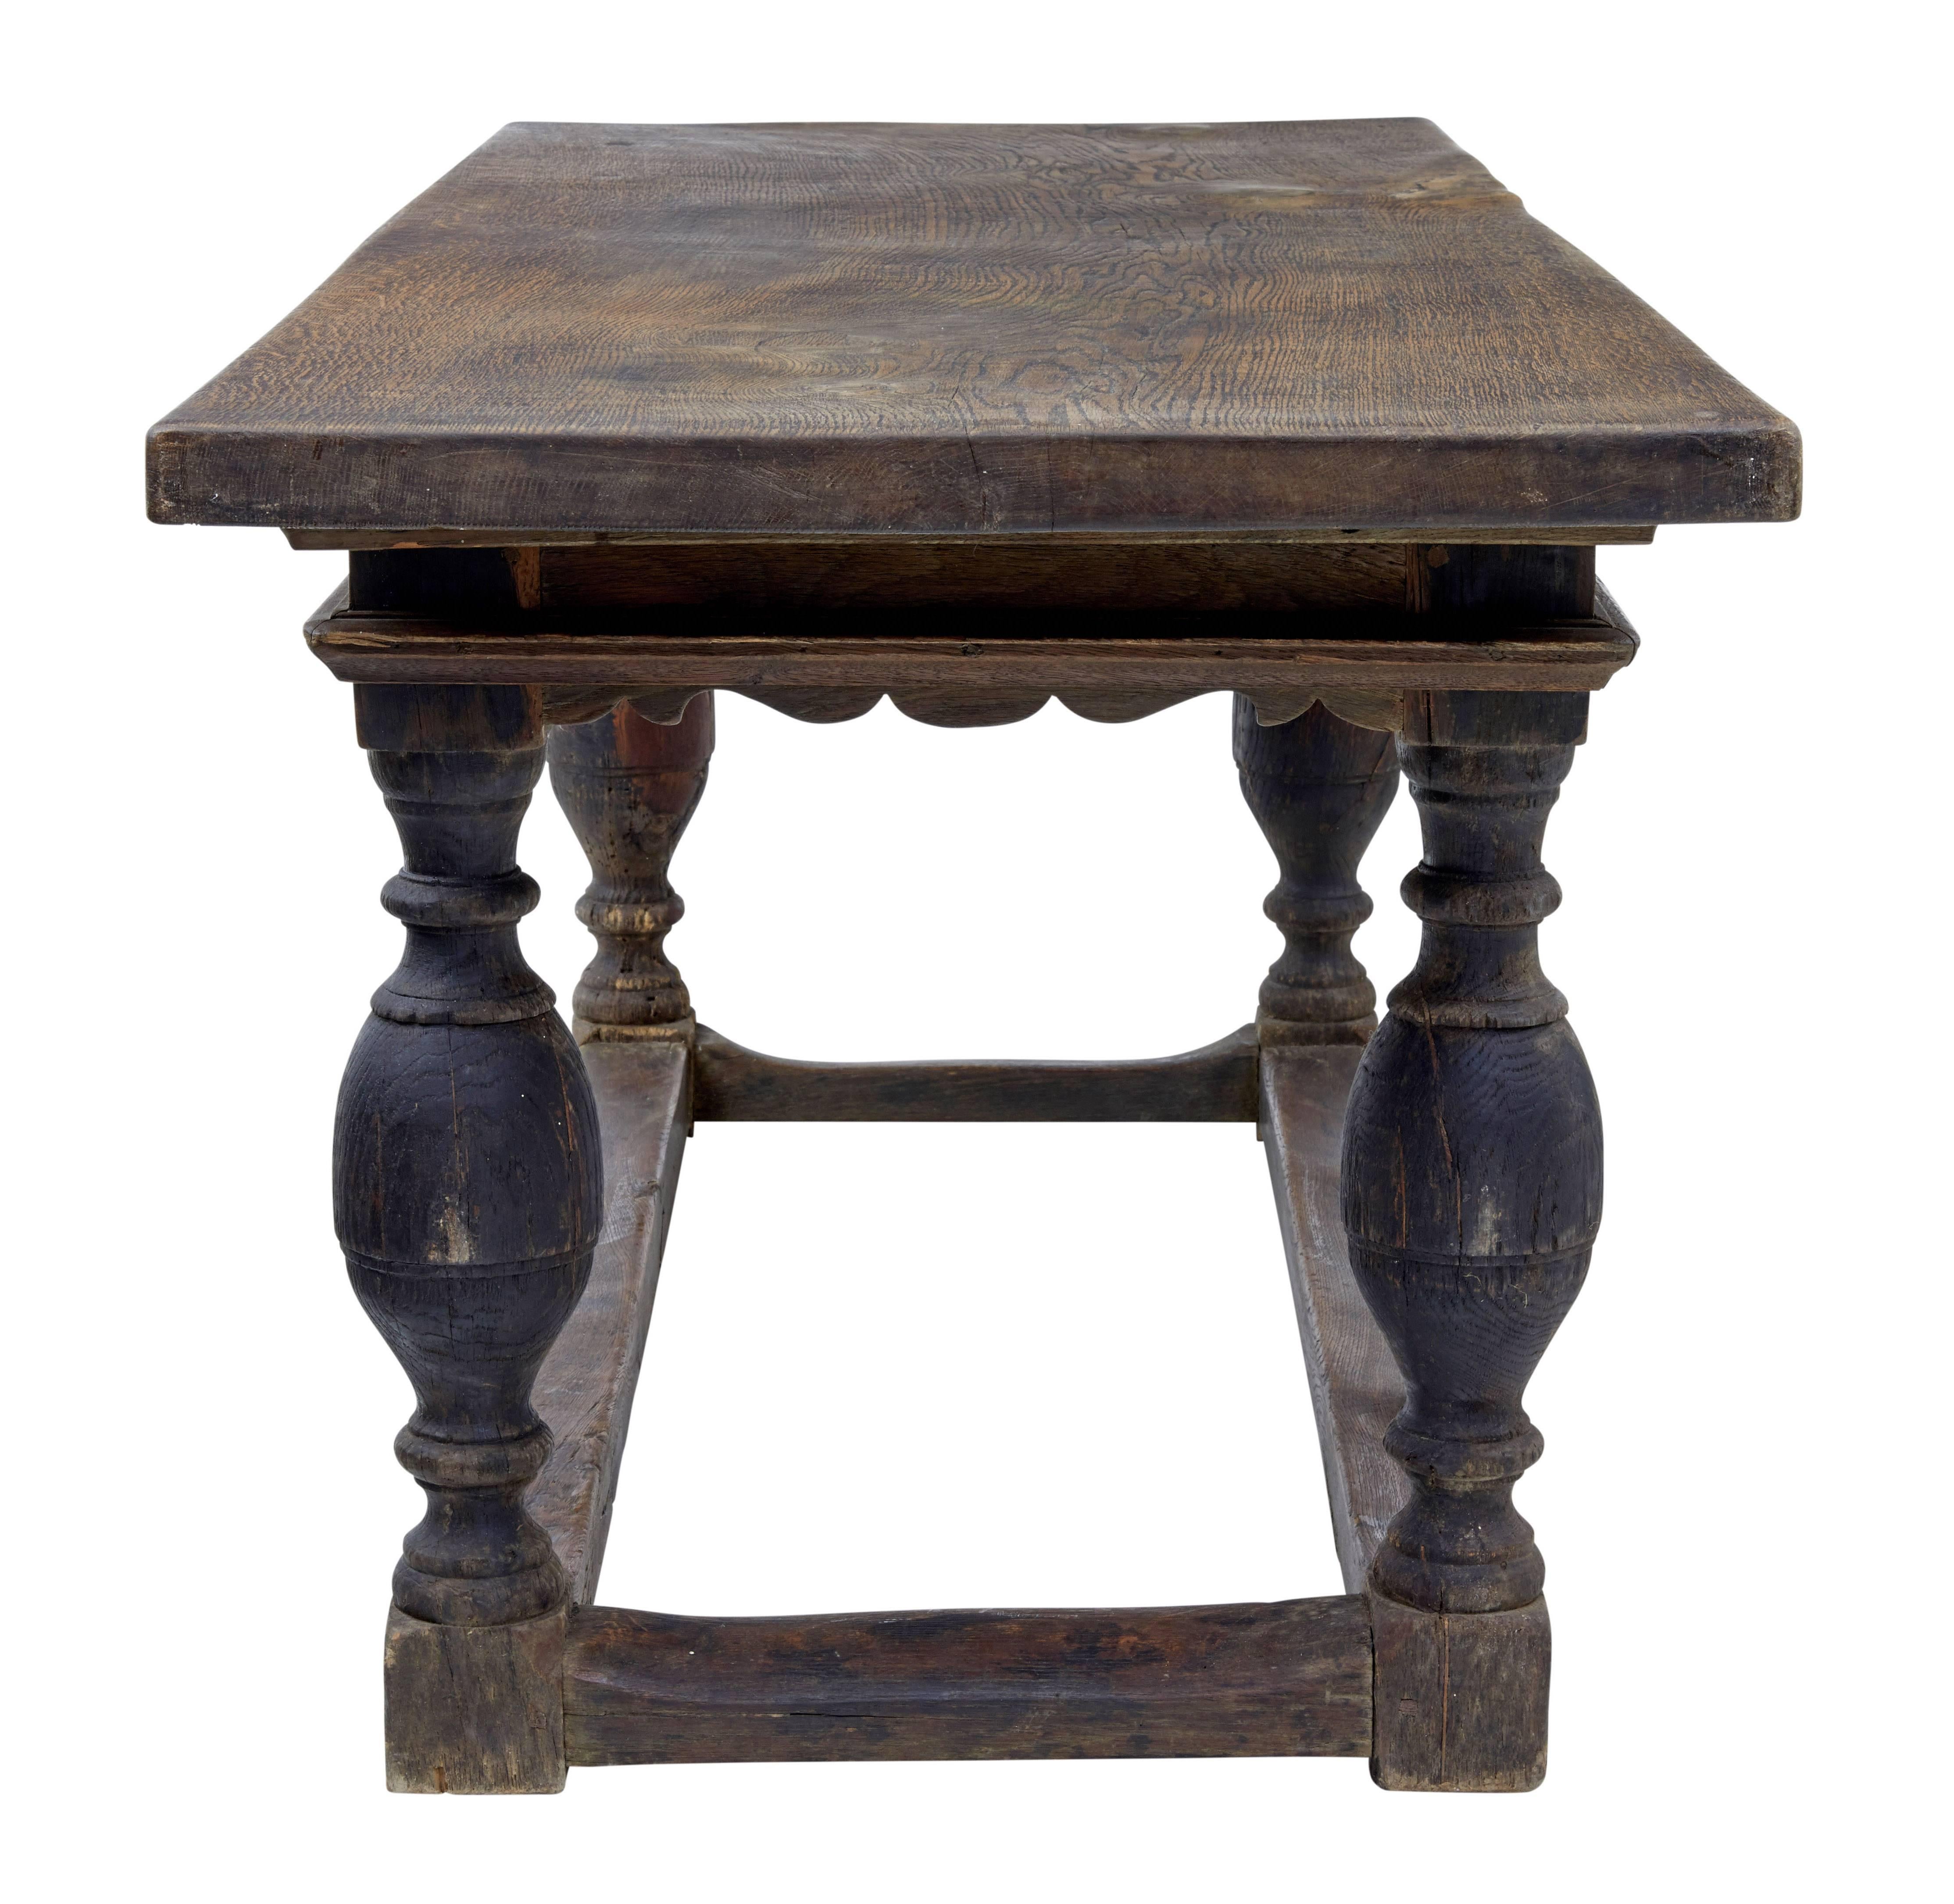 Carved 18th Century Scandinavian Baroque Dining Table